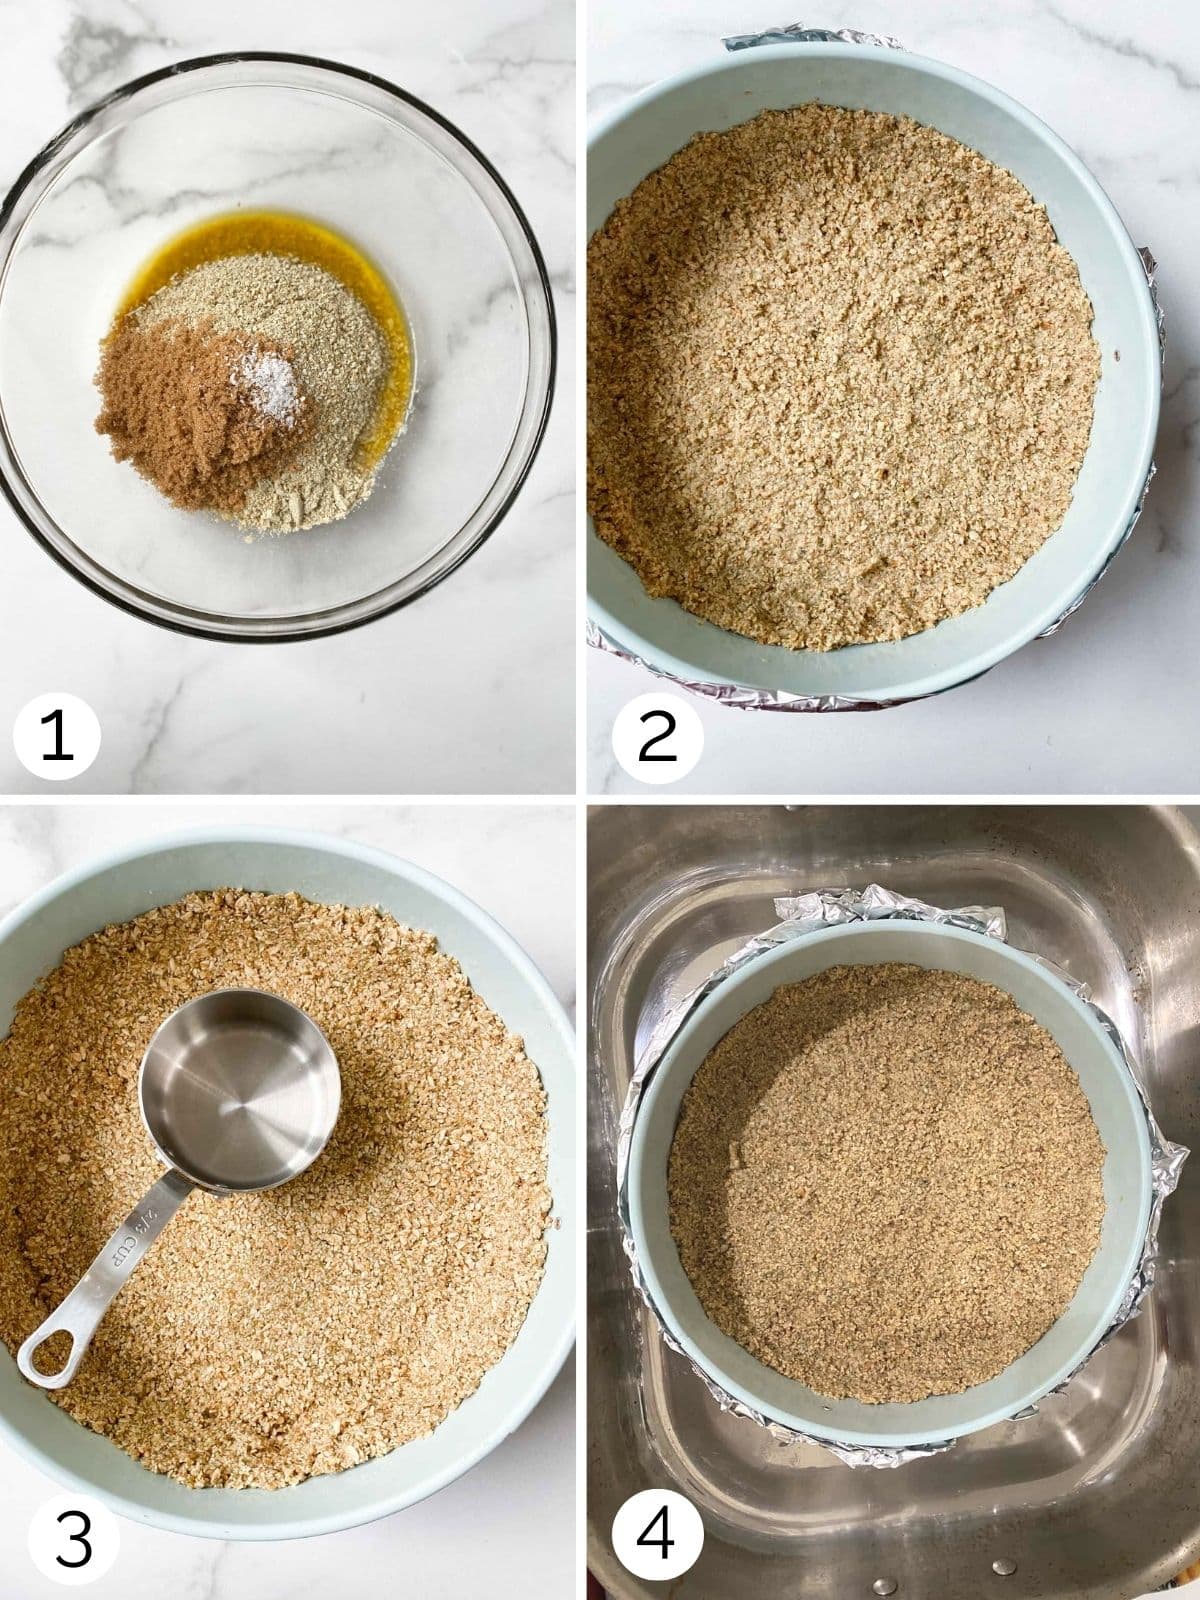 Step by step process for making an oat crust.